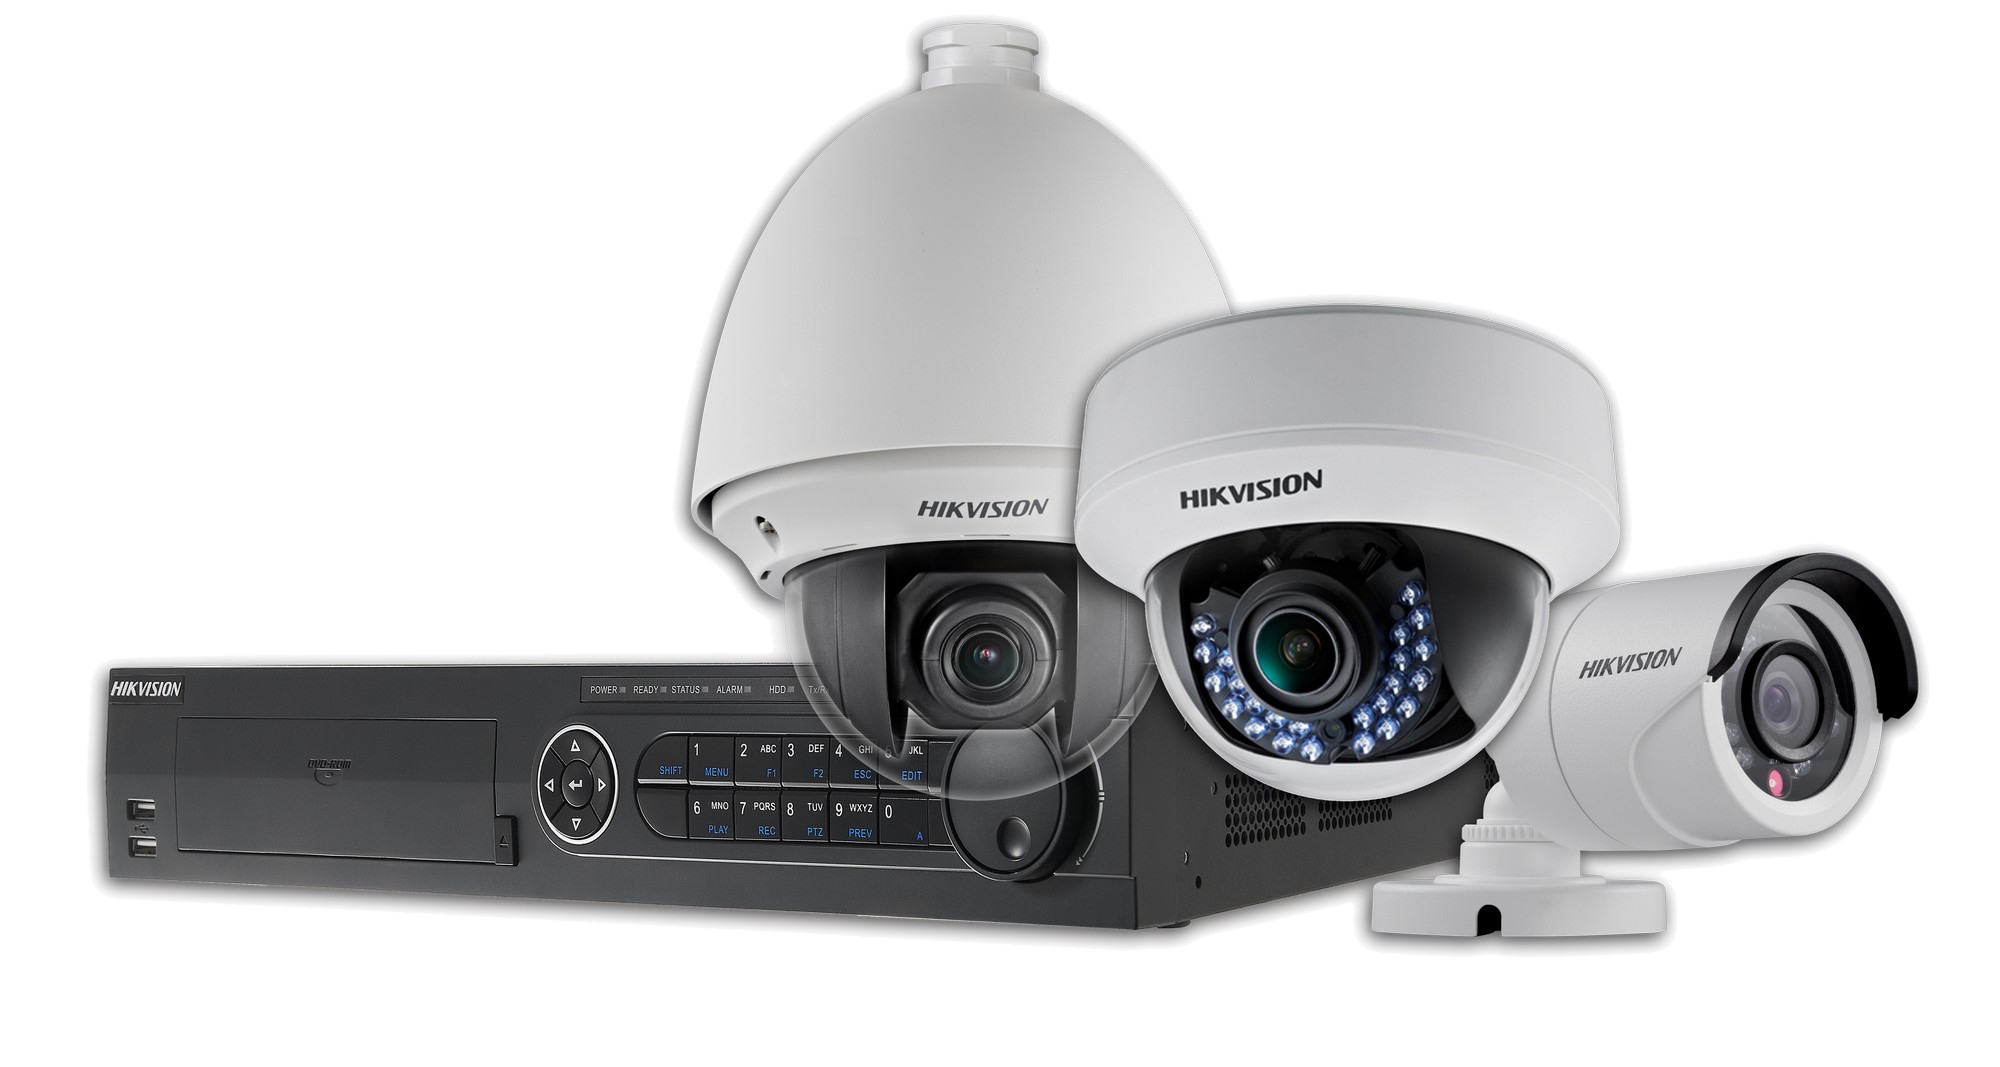 kisspng-closed-circuit-television-hdcctv-wireless-security-cctv-5ac2ec52030820.0181302115227239220124